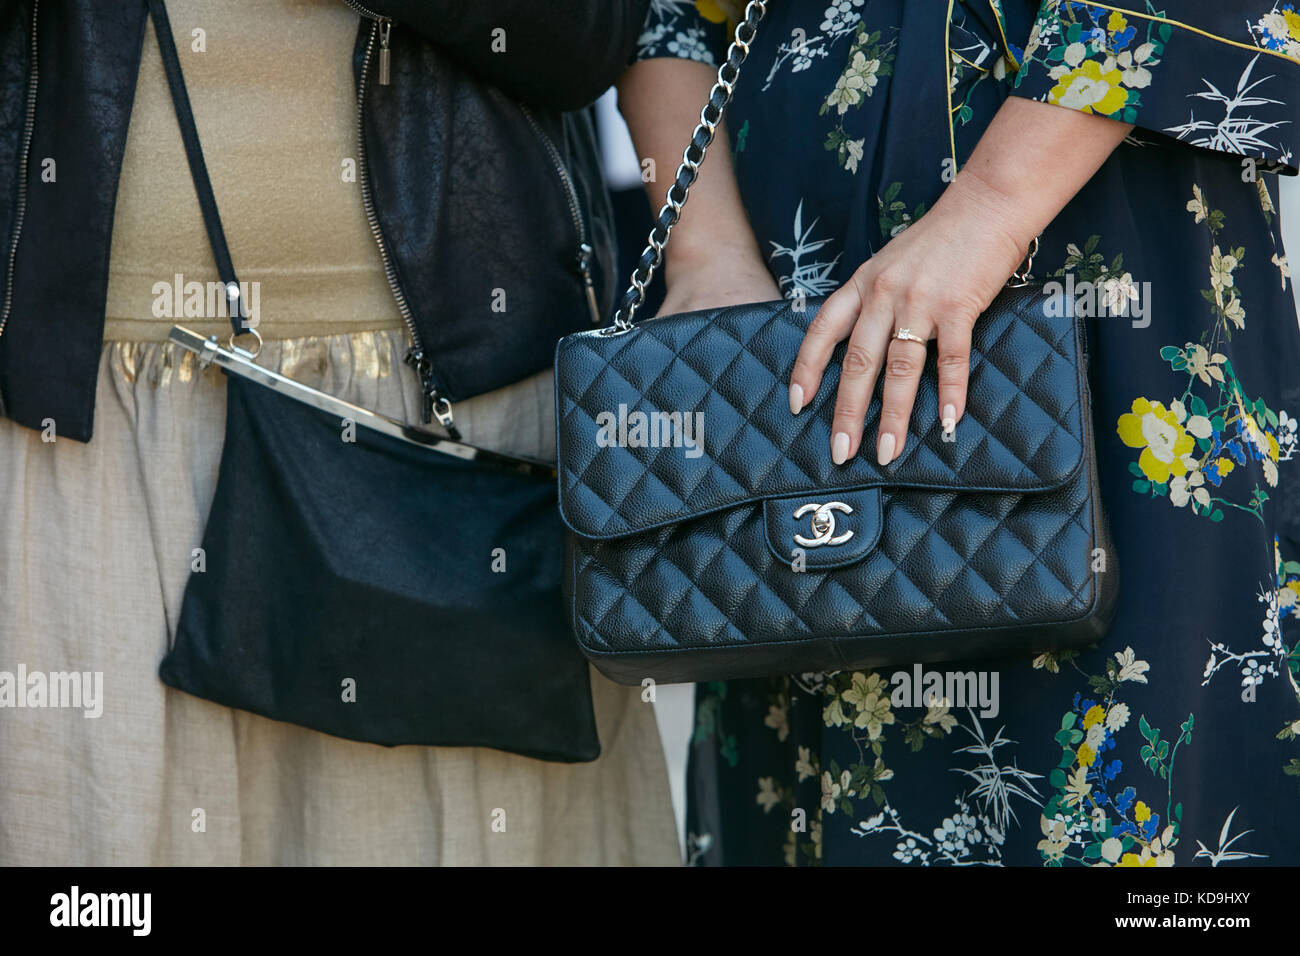 MILAN - SEPTEMBER 21: Women with Chanel black leather bag and floral dress  before Max Mara fashion show, Milan Fashion Week street style on September  Stock Photo - Alamy